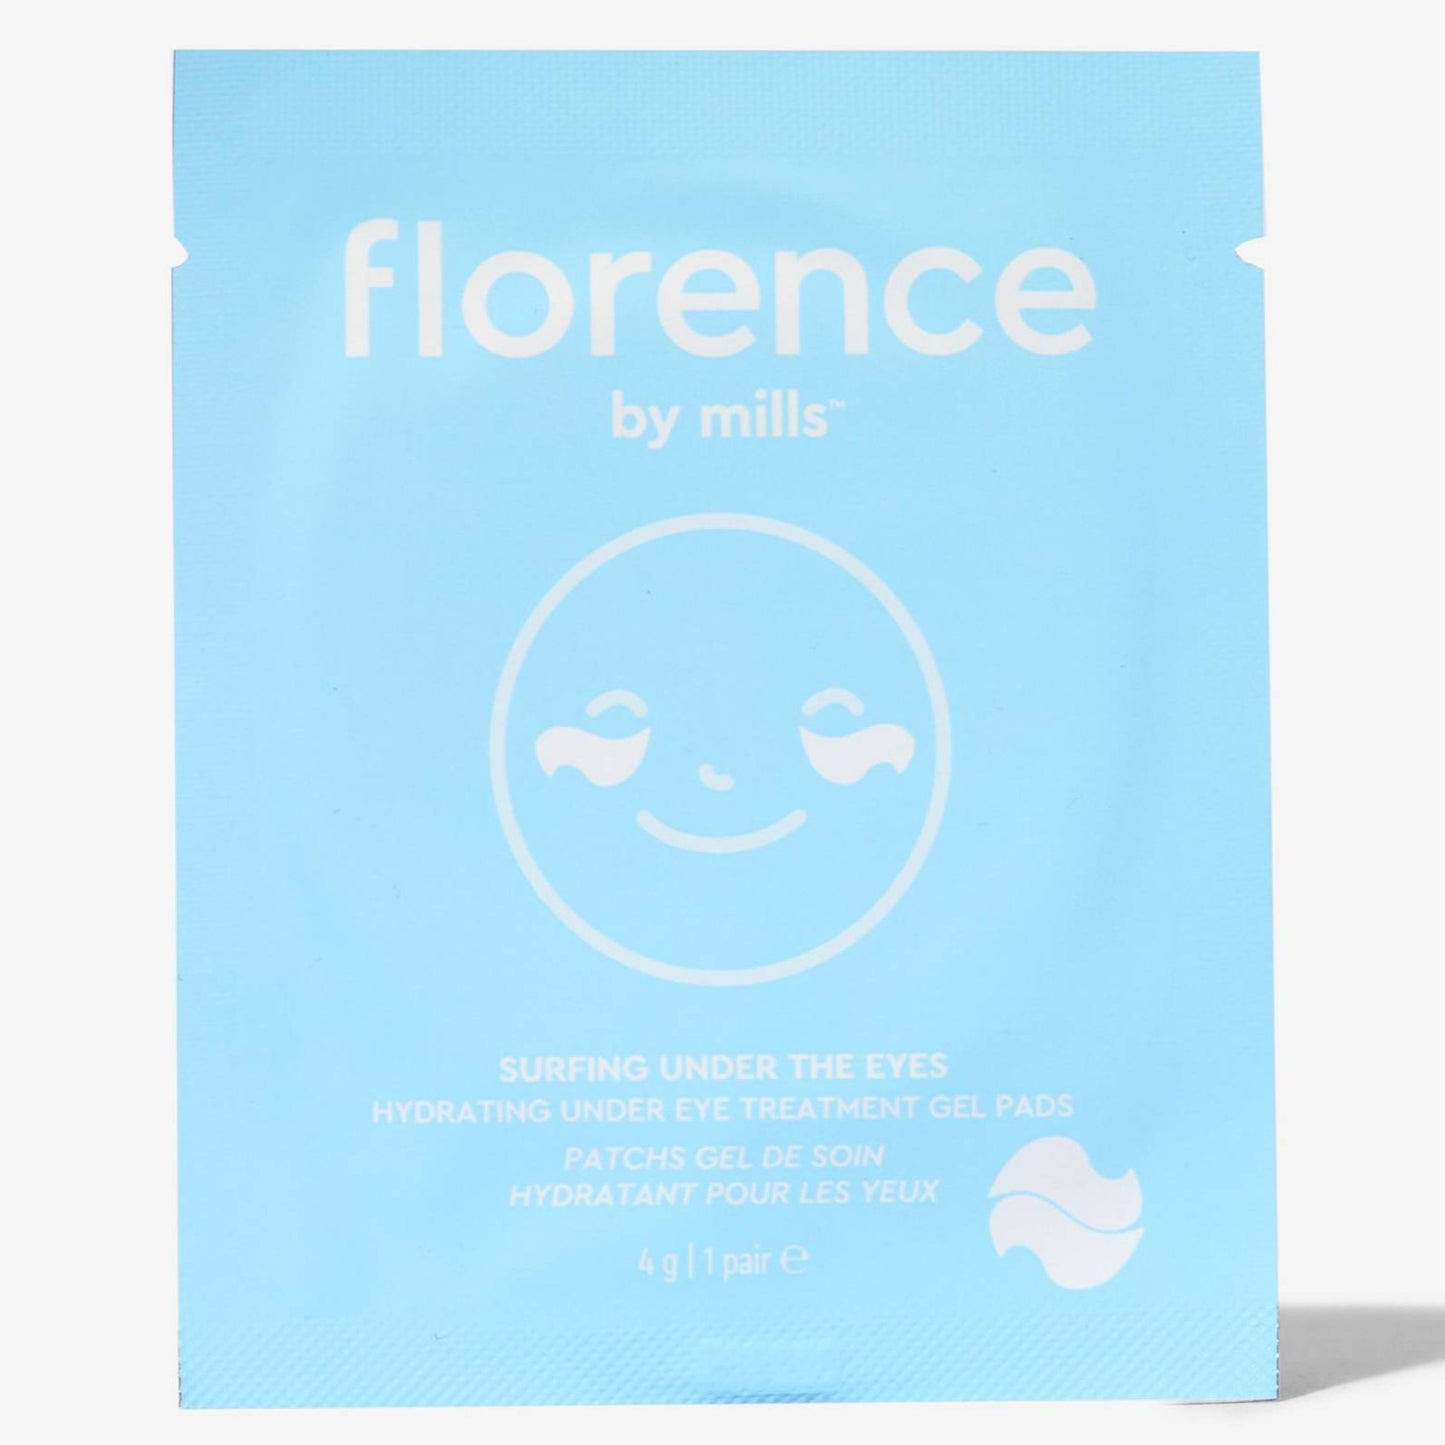 FLORENCE BY MILLS | SURFING UNDER THE EYES HYDRATING UNDER EYE TREATMENT GEL PADS